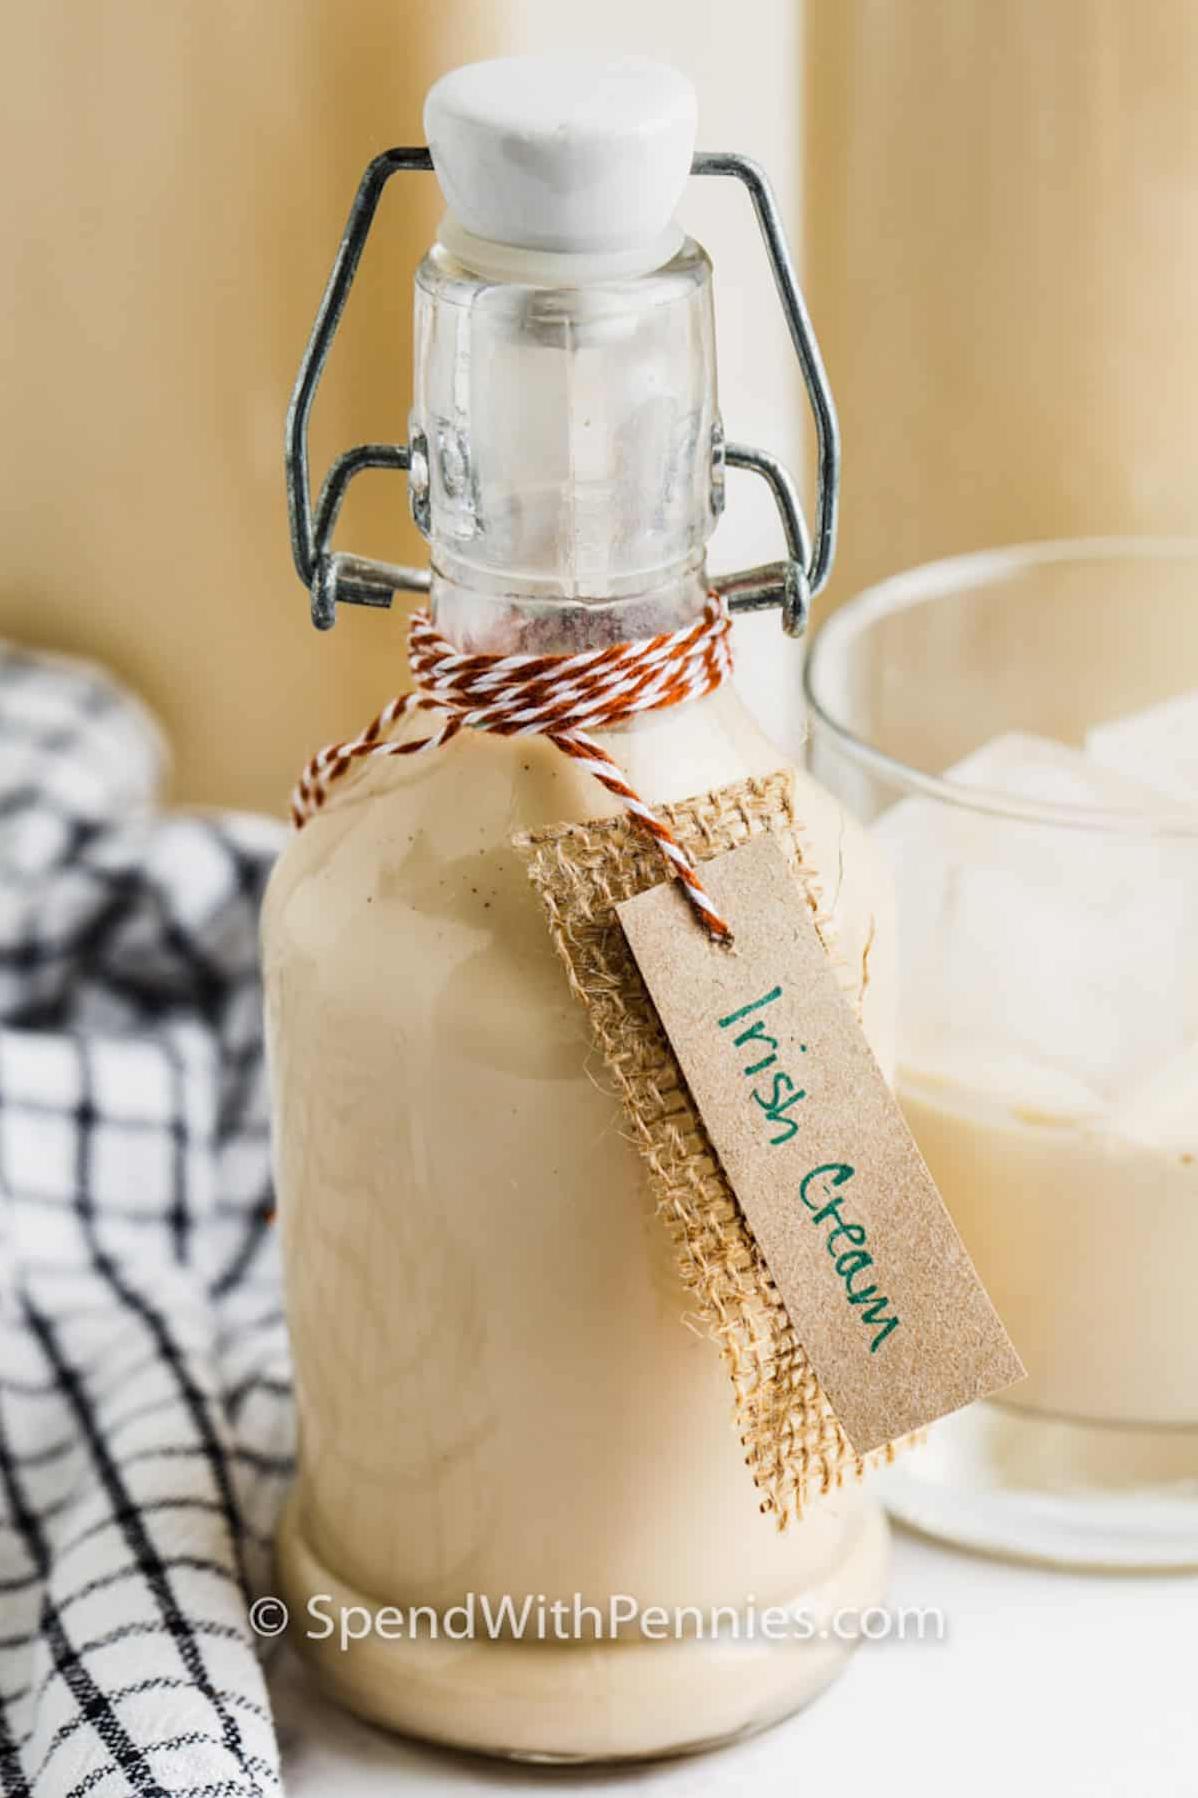  Are you ready to sip on something magical? This homemade Irish Cream is truly enchanting.